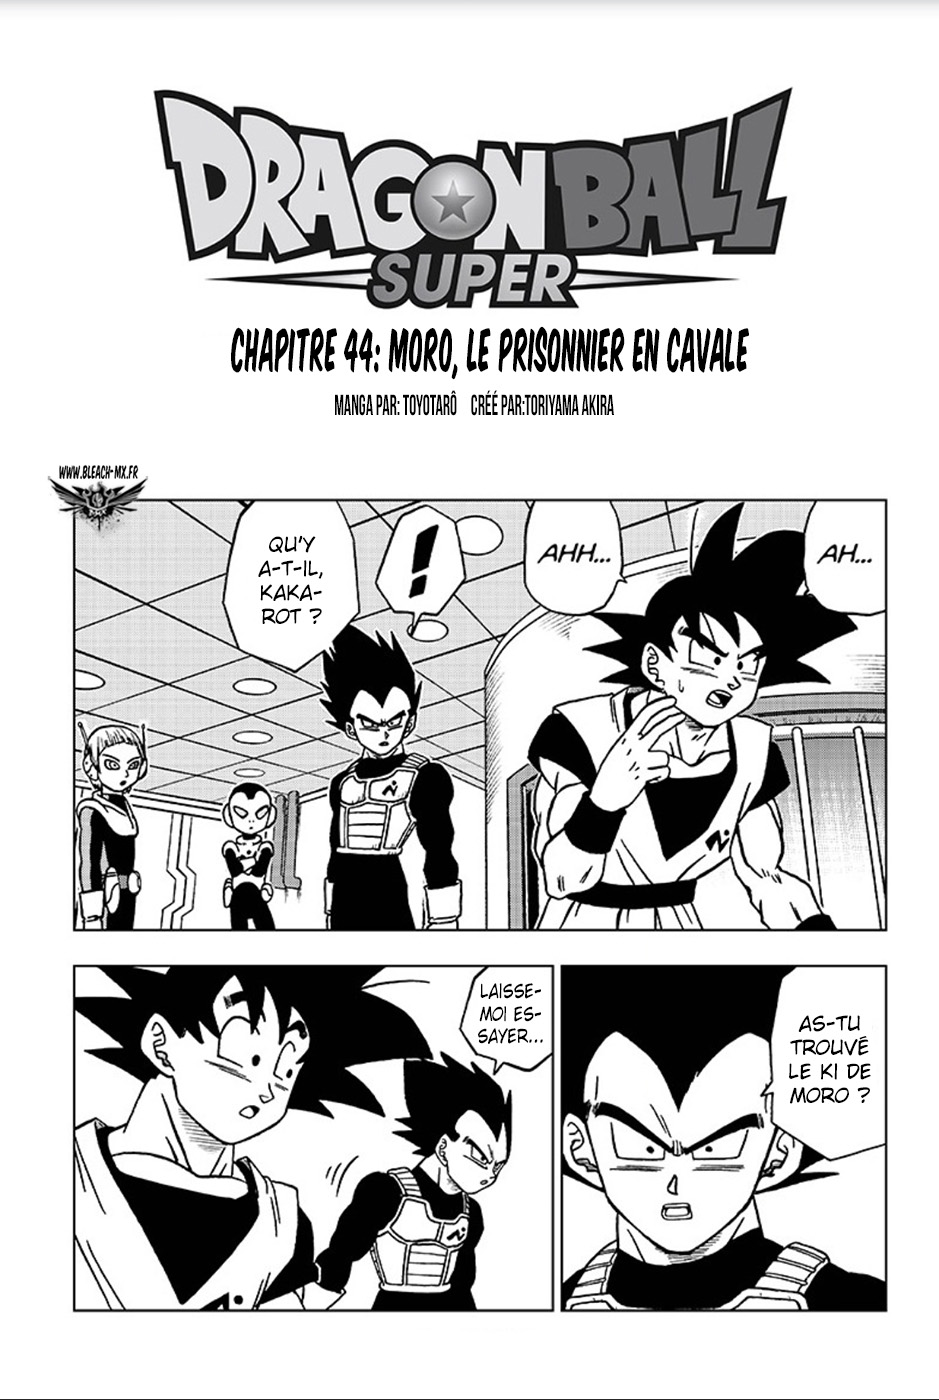 Dragon Ball Super: Chapter chapitre-44 - Page 1